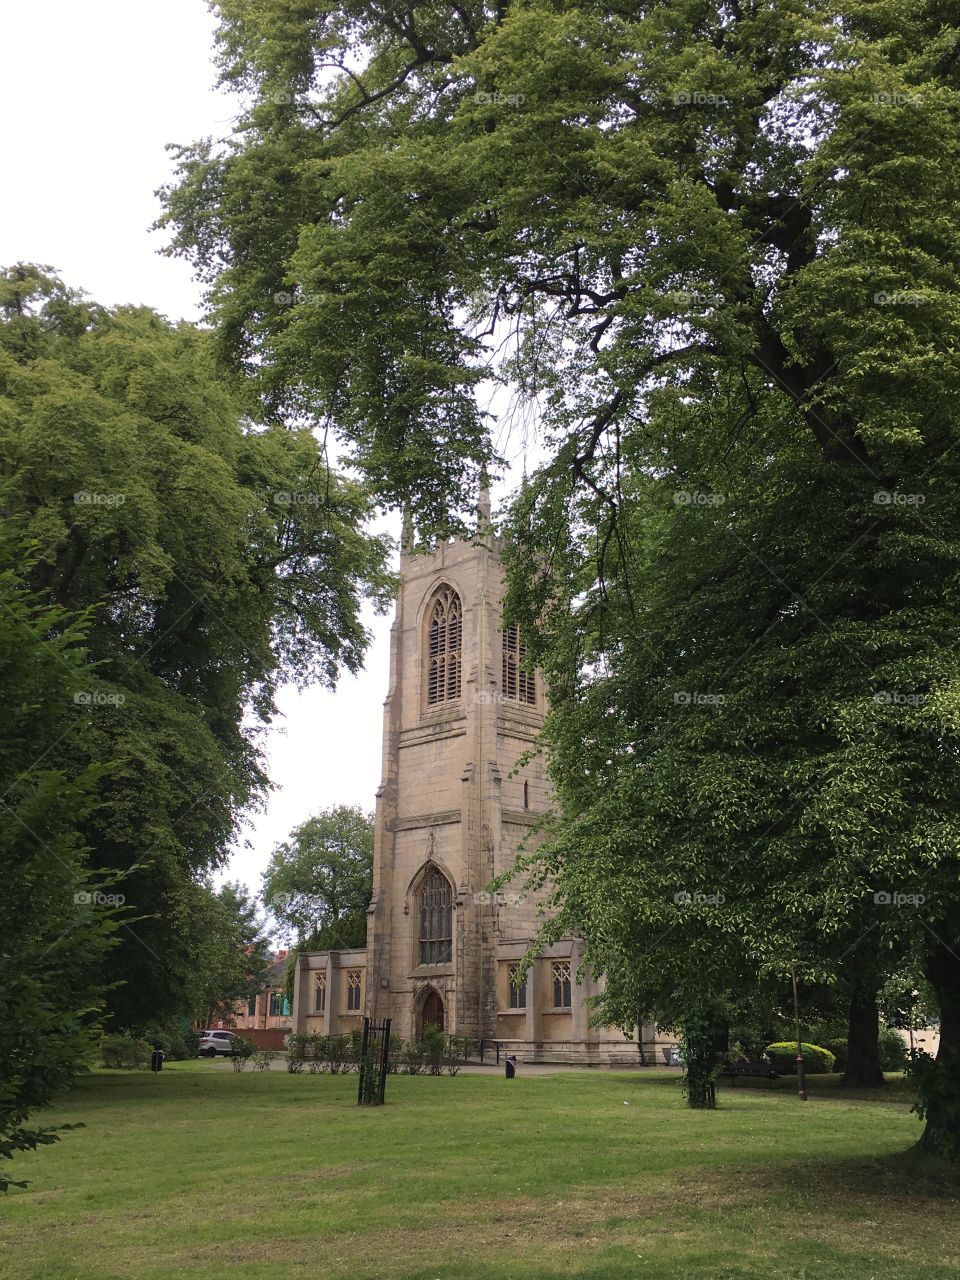 All saints church in Gainsborough, England with 15th century mediaeval tower, surrounded by trees